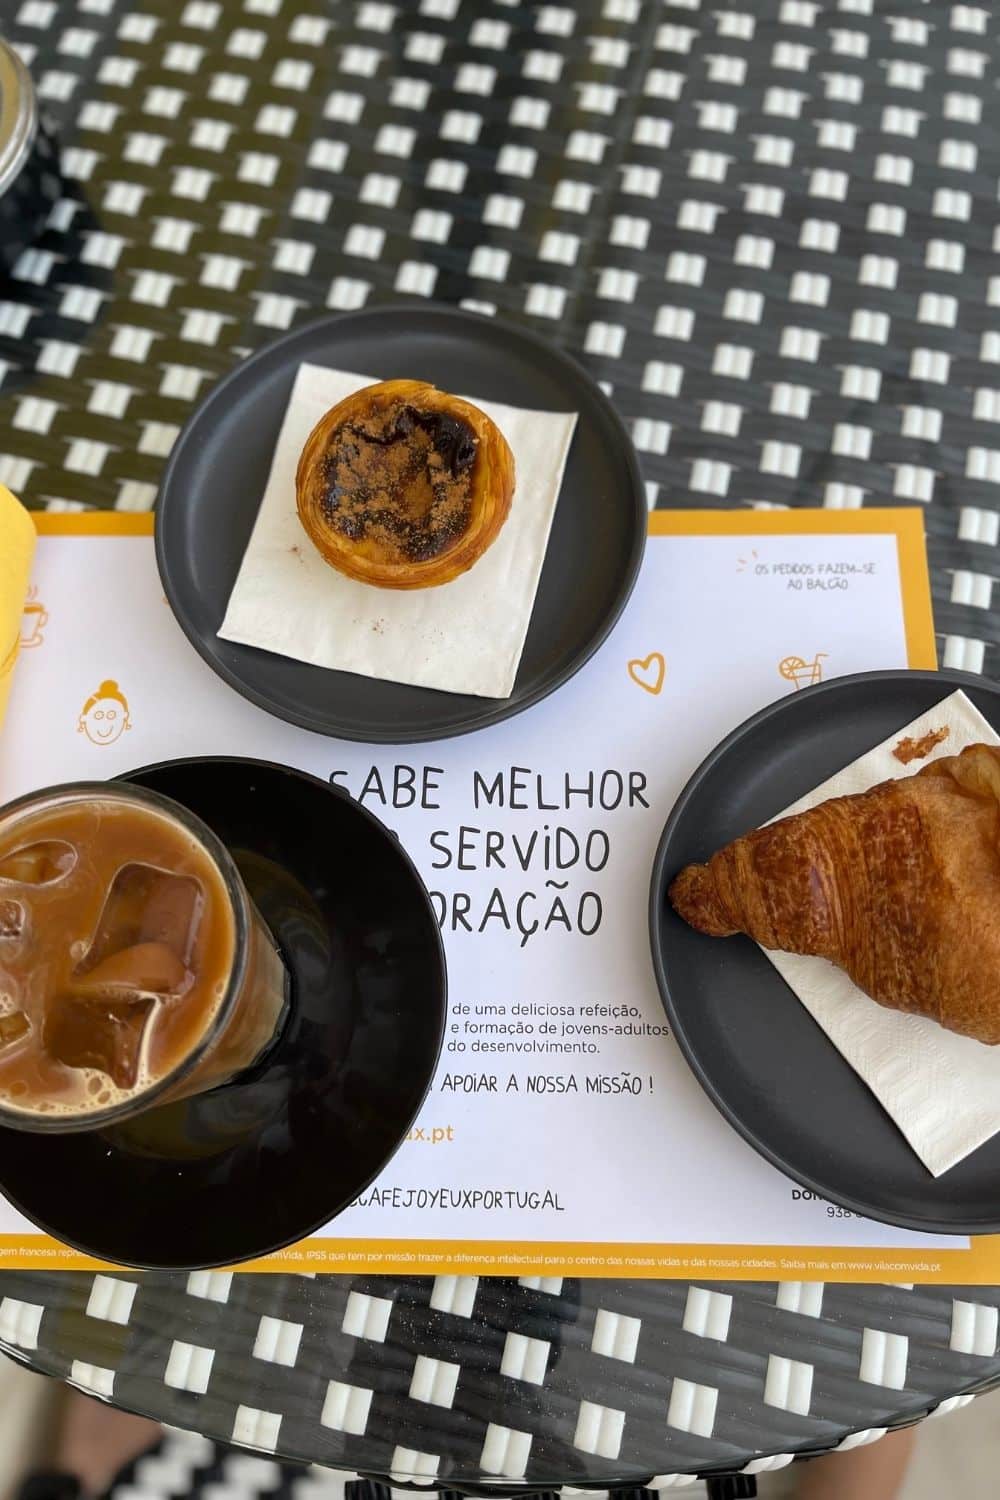 A close-up of a cafe table with a black and white geometric pattern. On it is a traditional Portuguese pastel de nata on a small plate, a croissant, and a glass of iced coffee. Below the coffee is a paper placemat with the text "SABE MELHOR SERVIDO COM CORAÇÃO" (Tastes better served with heart), reflecting the cafe's ethos, and there is a card indicating that orders are placed at the counter.